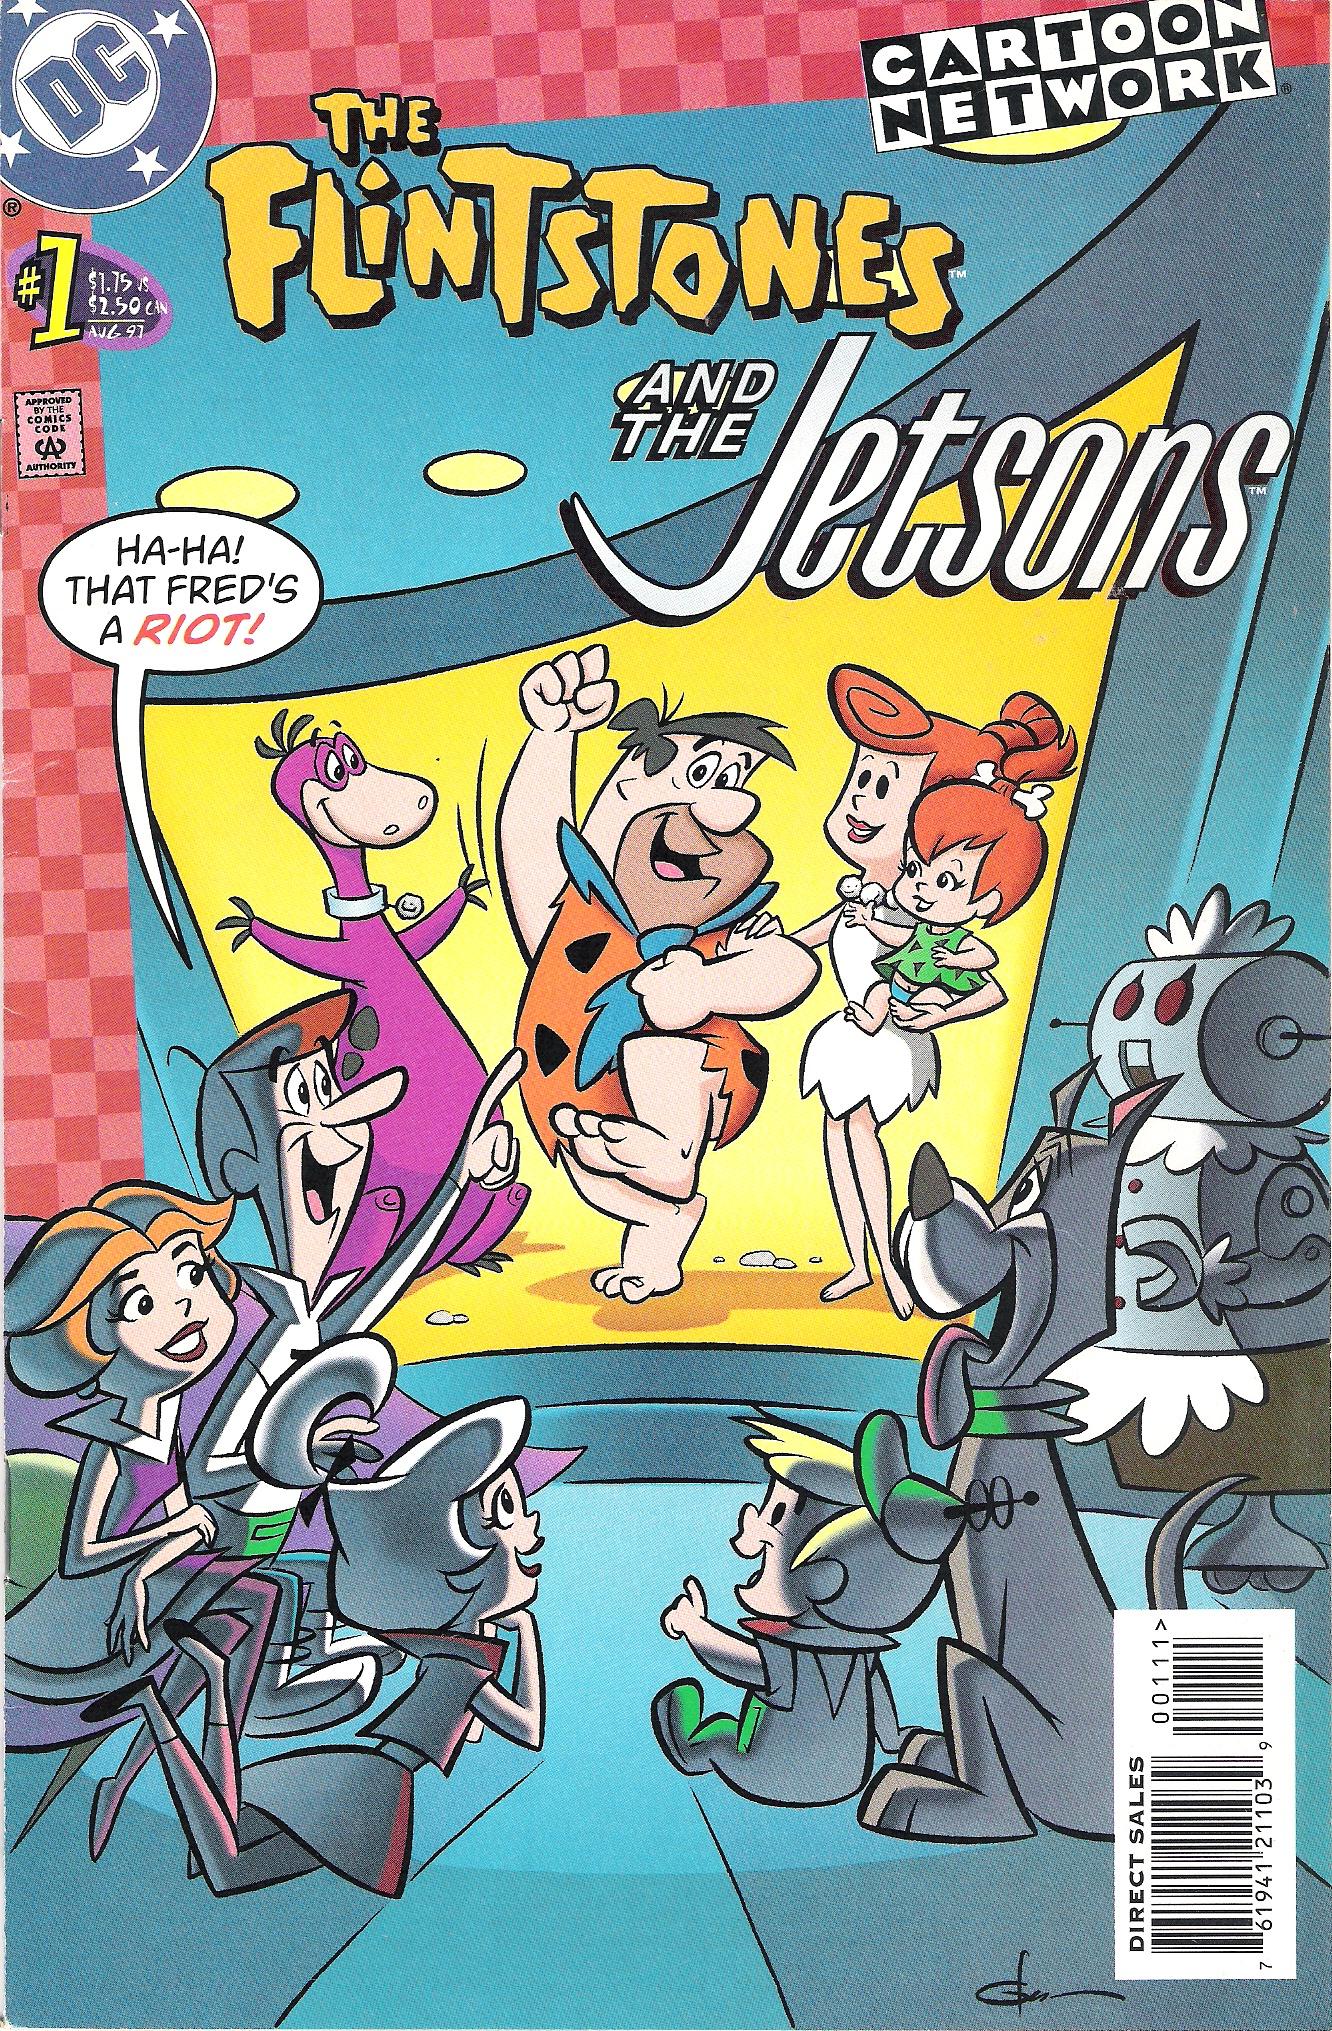 The Flintstones and the Jetsons Vol. 1 #1